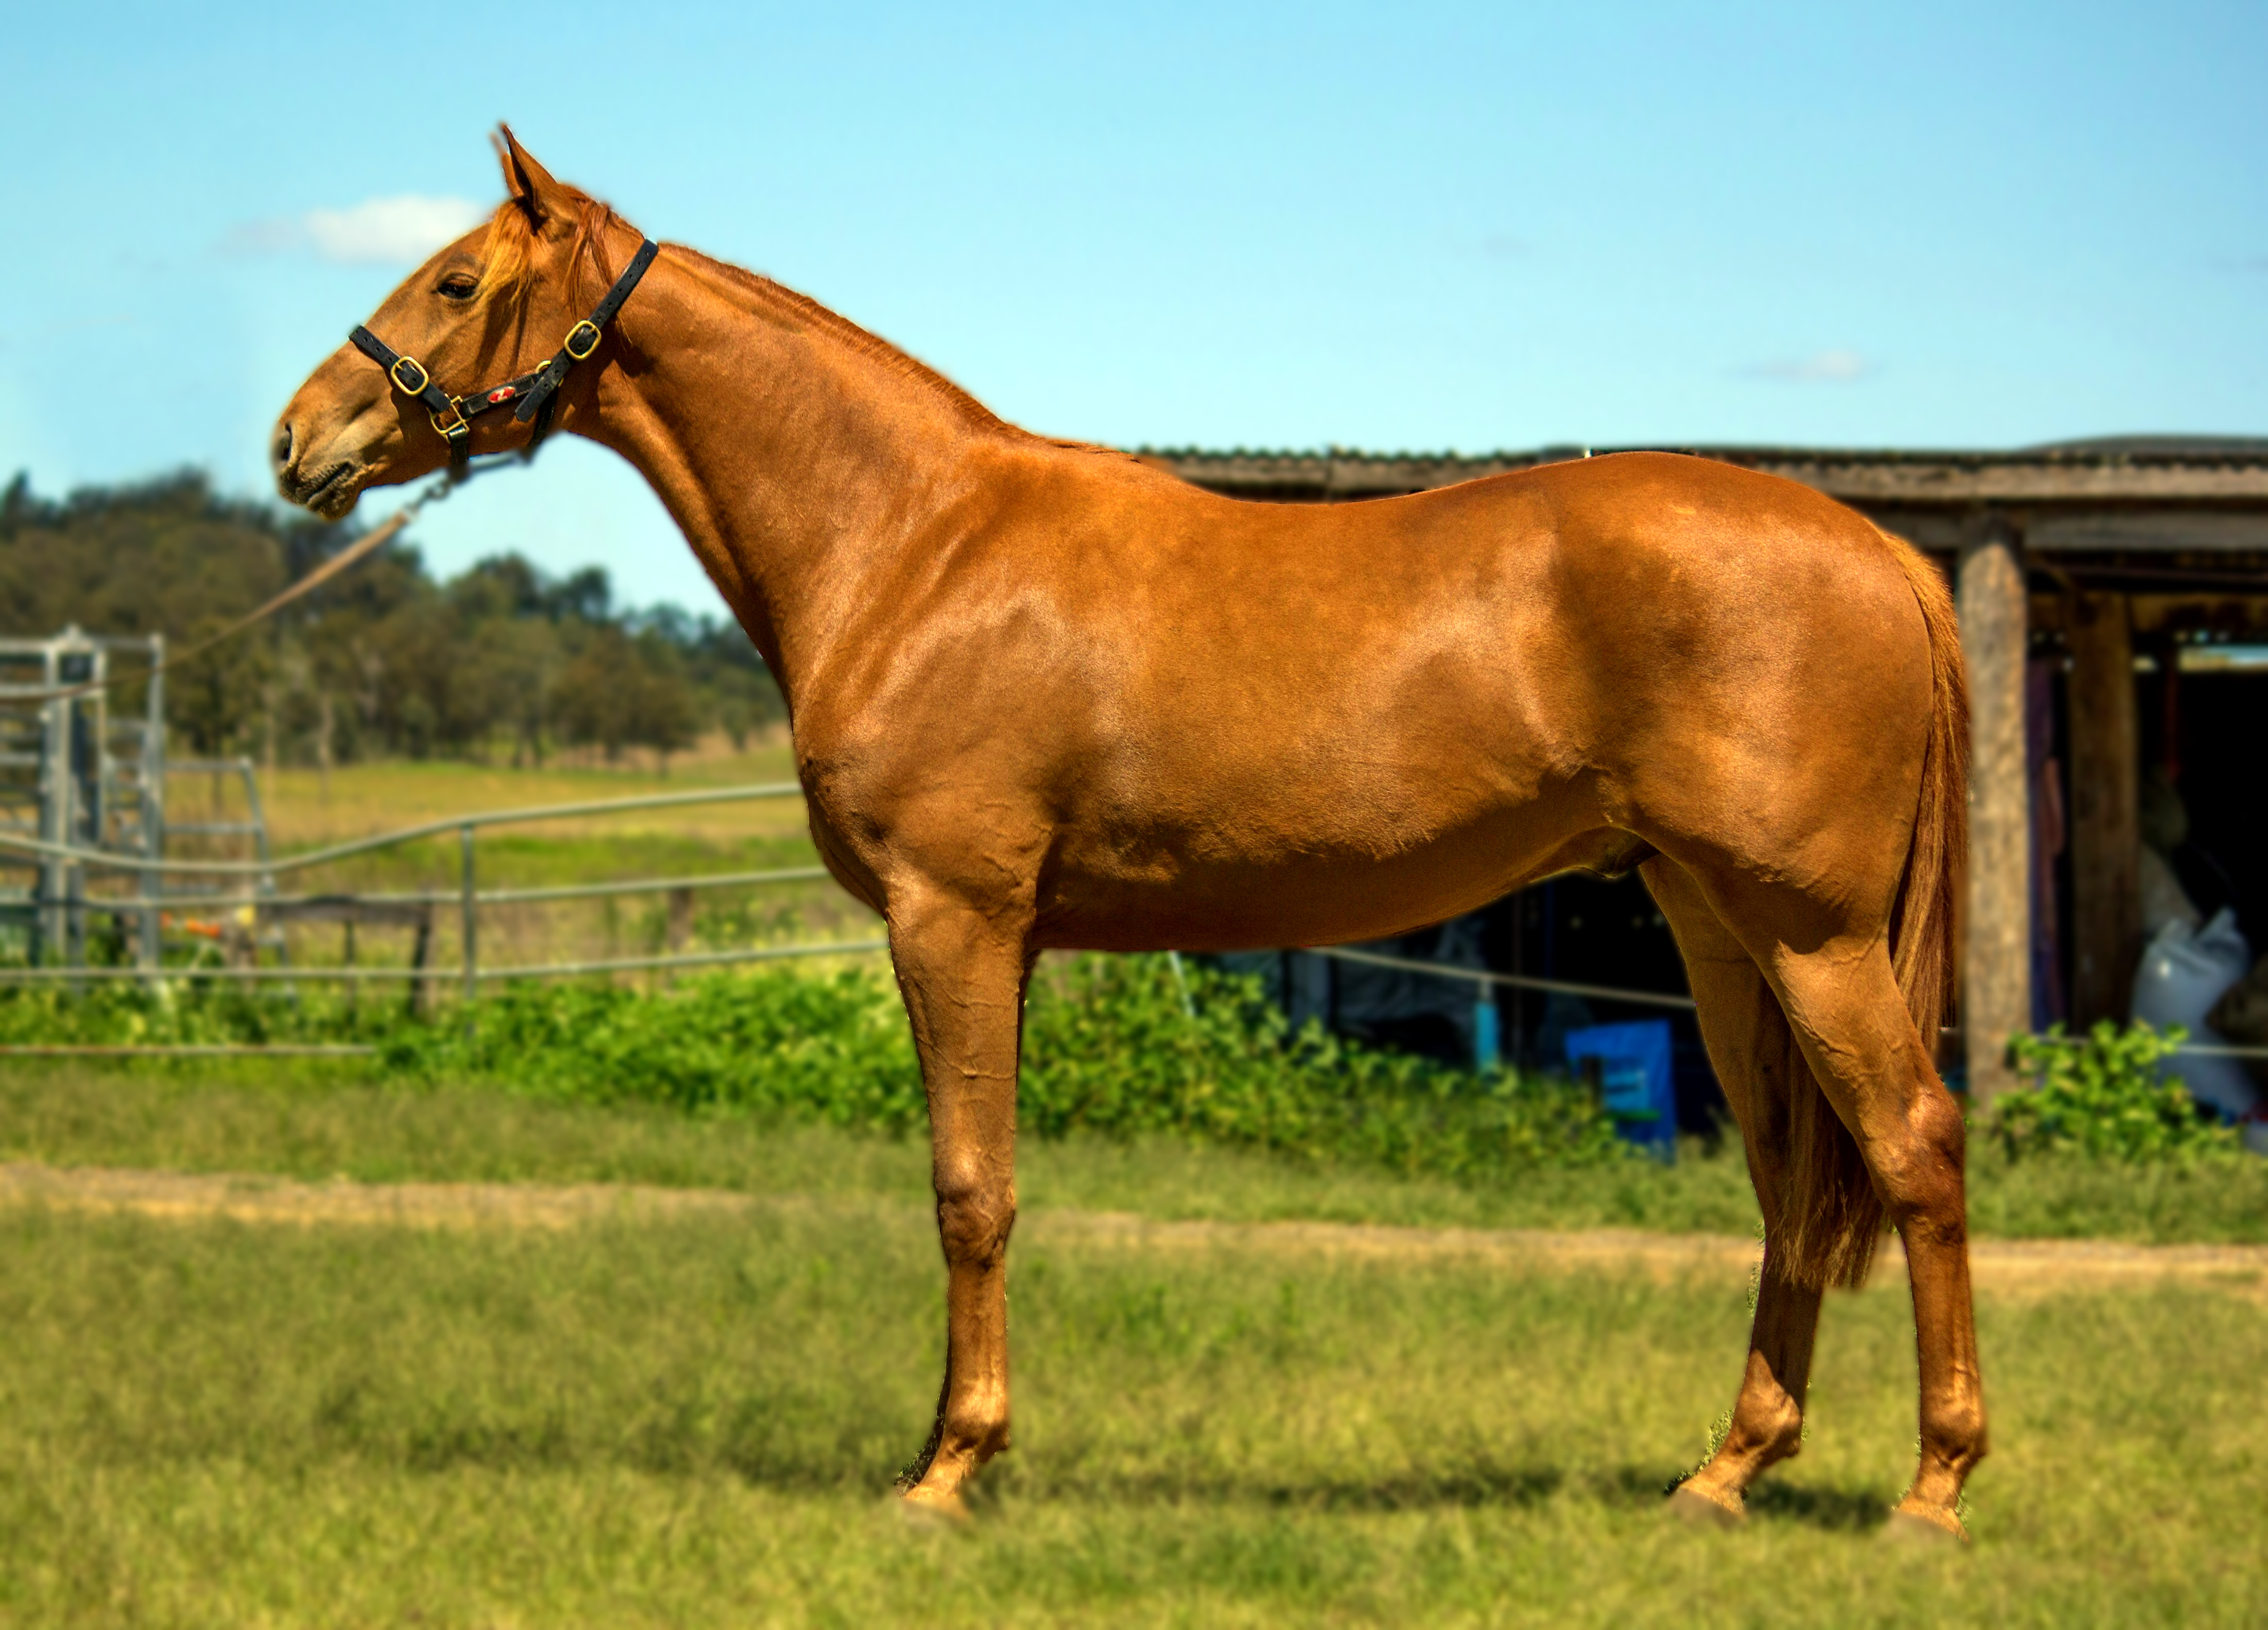  Flame, a rising two year old gelding